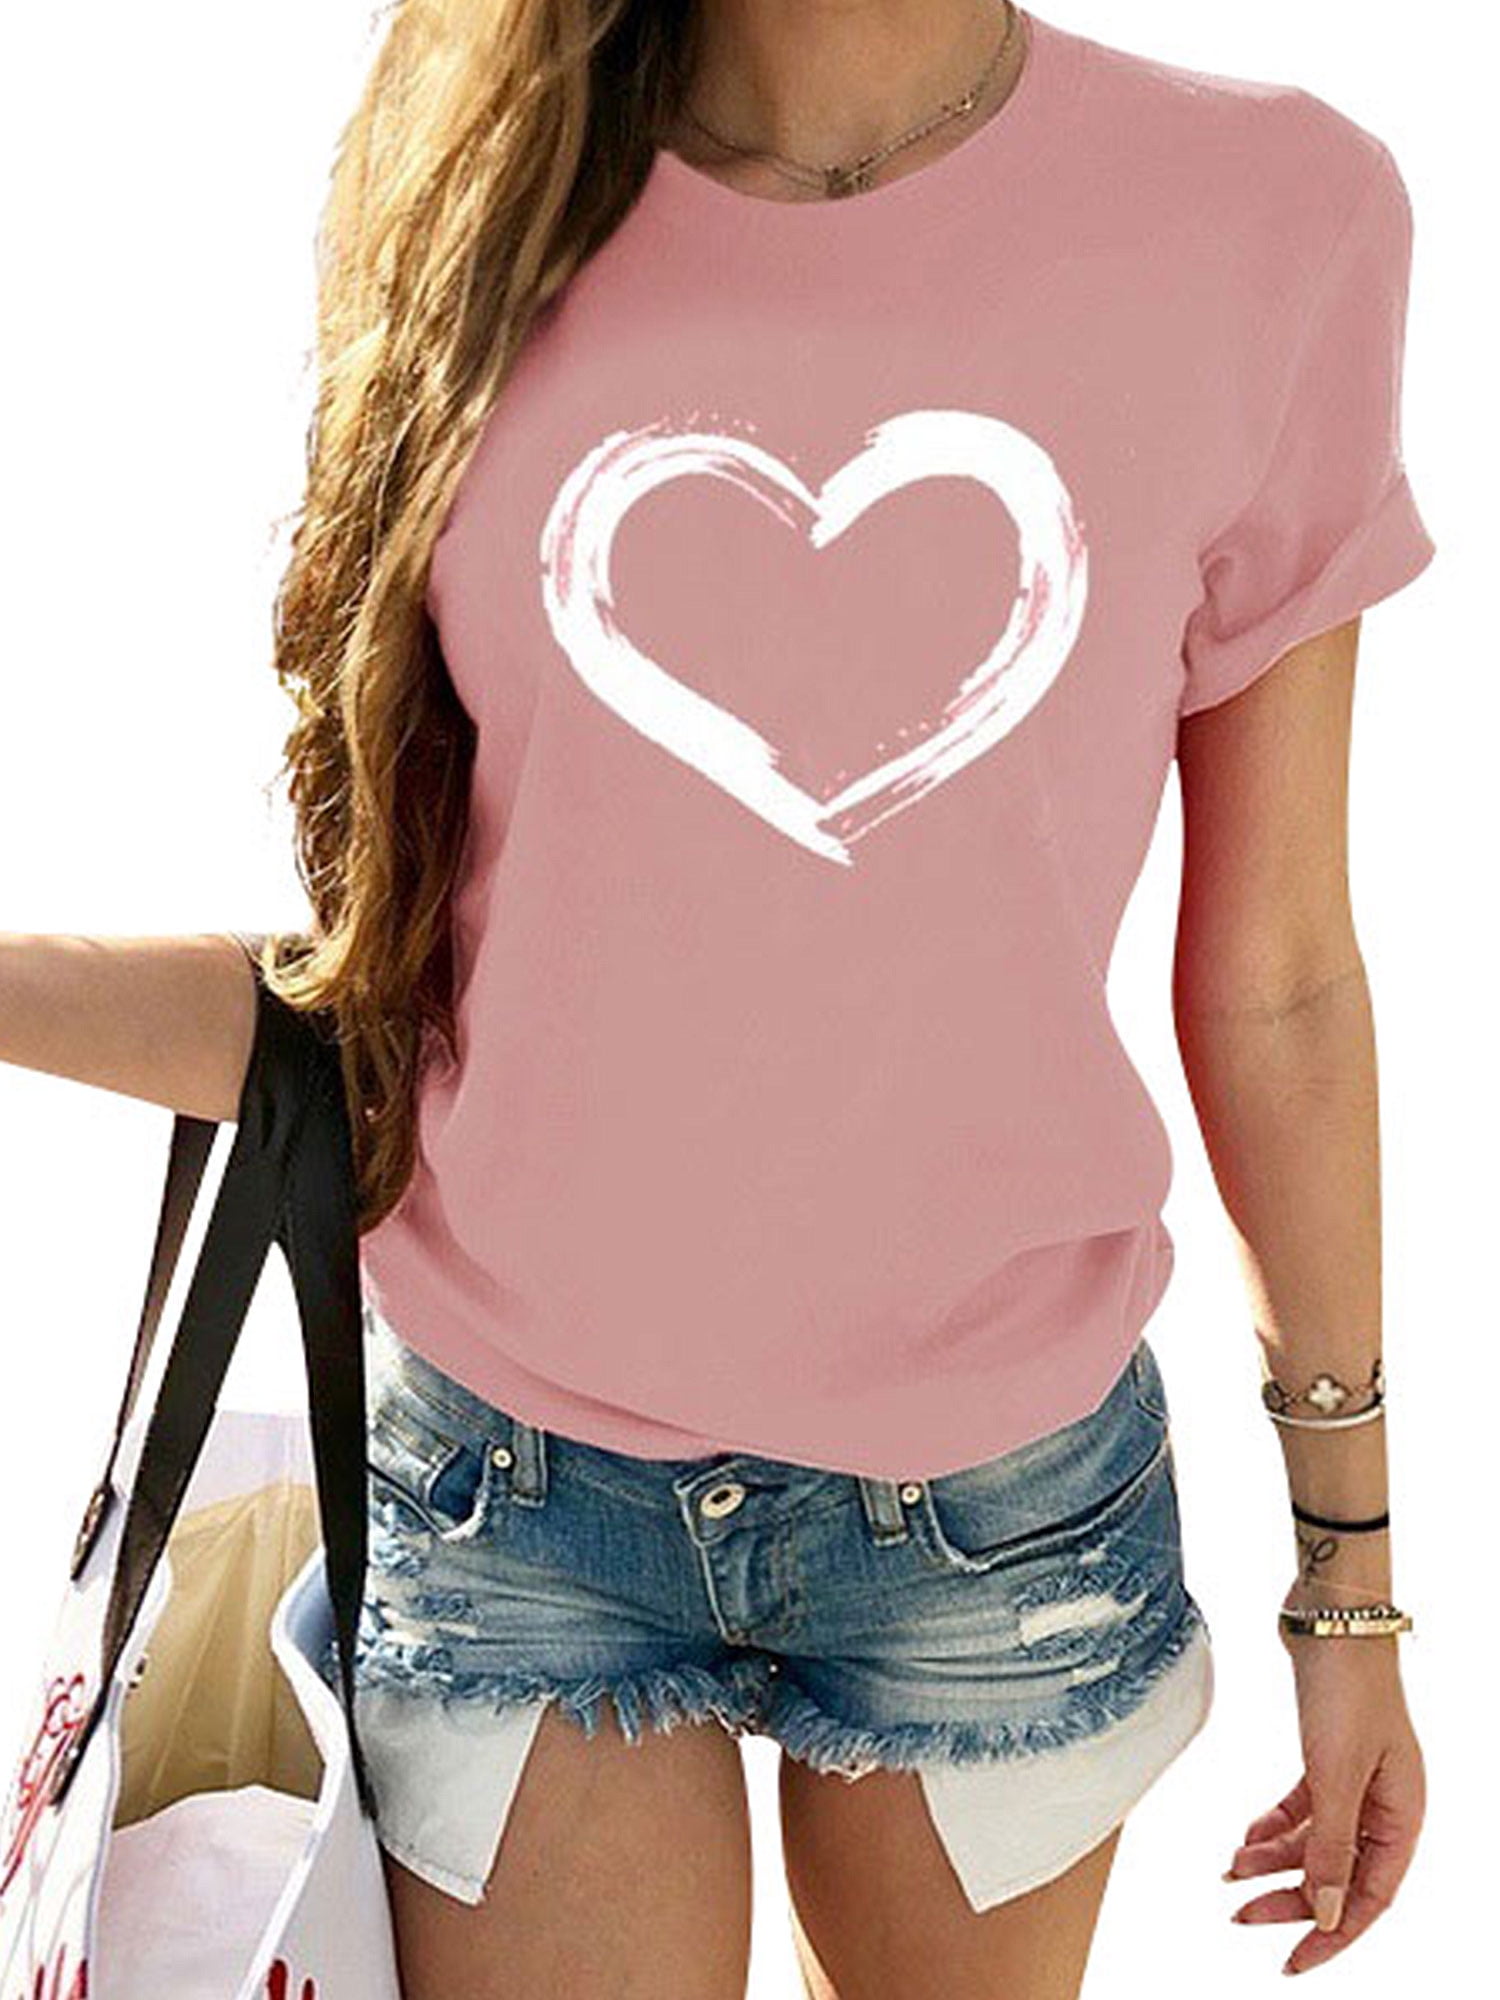 Womens Tops Plus Size T Shirts for Women Summer Letter Printing Short Sleeve Shirts Casual Tunic Tops Blouse Tees 